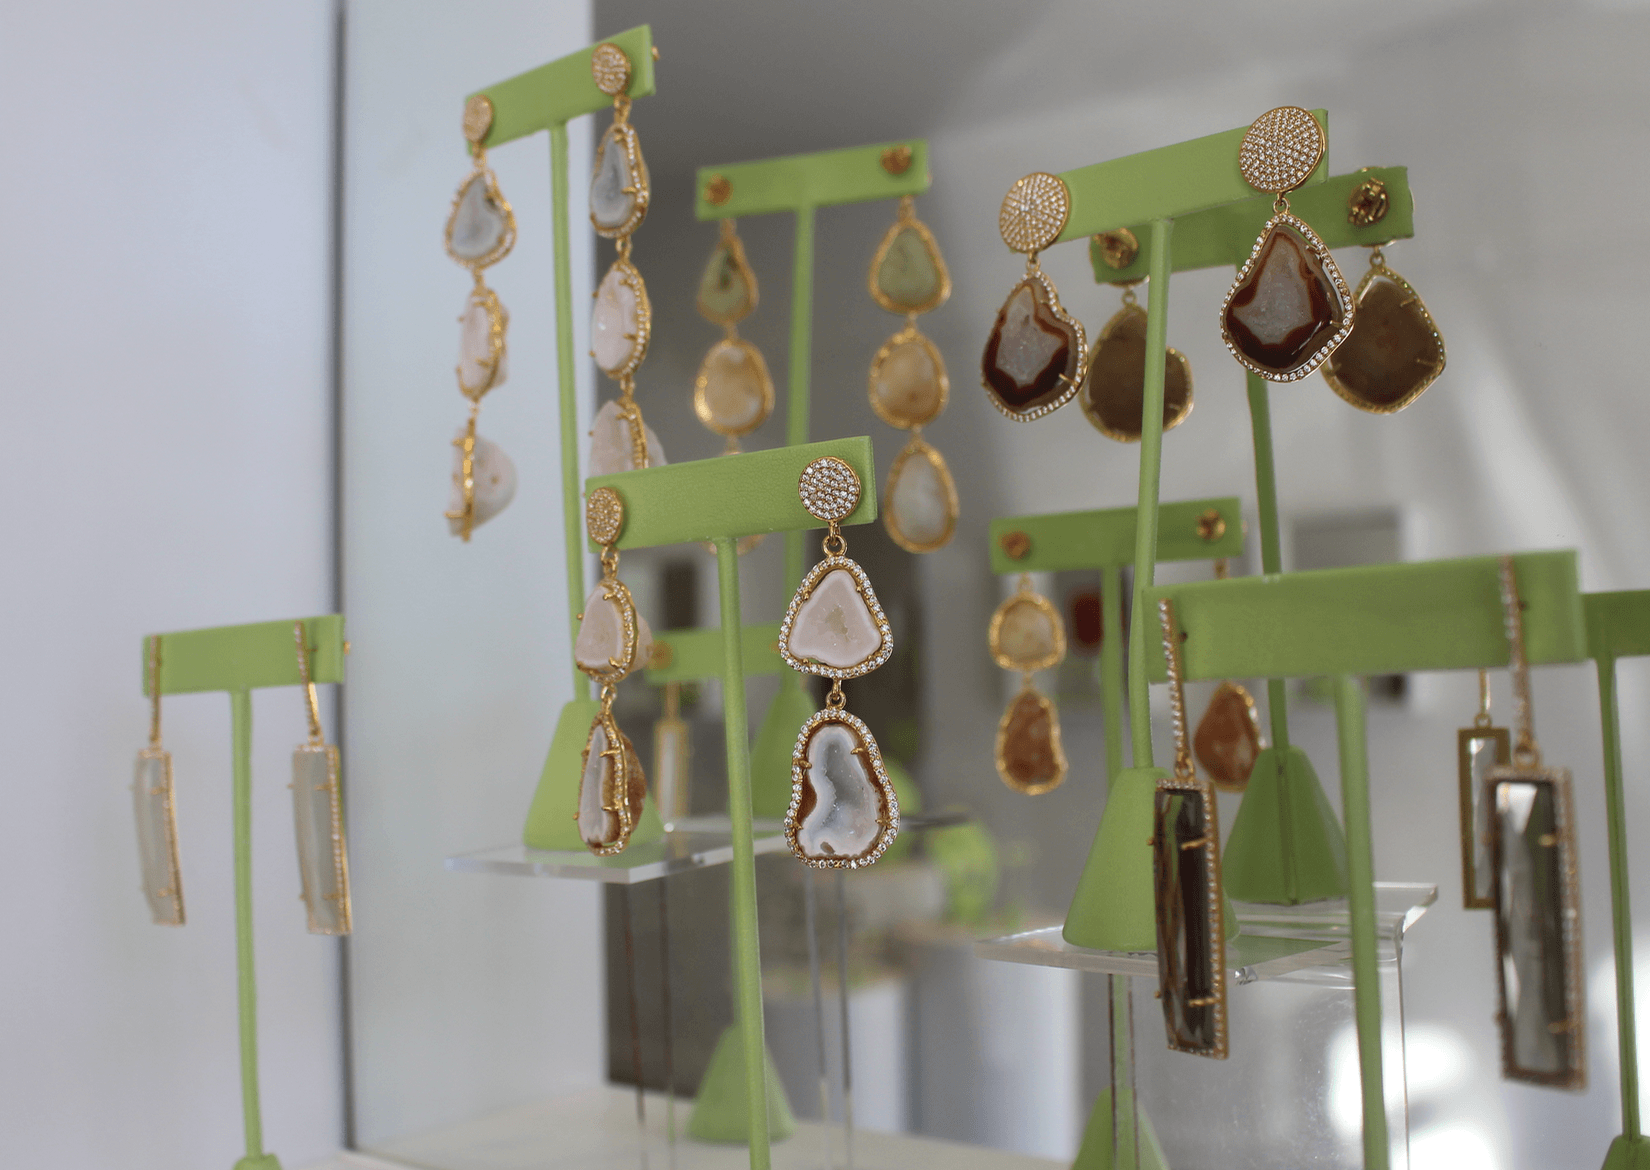 Susan Hanover Designs' earrings on display at her pop up shop at 89 Greenwich Avenue. Nov 27, 2017 Photo: Leslie Yager